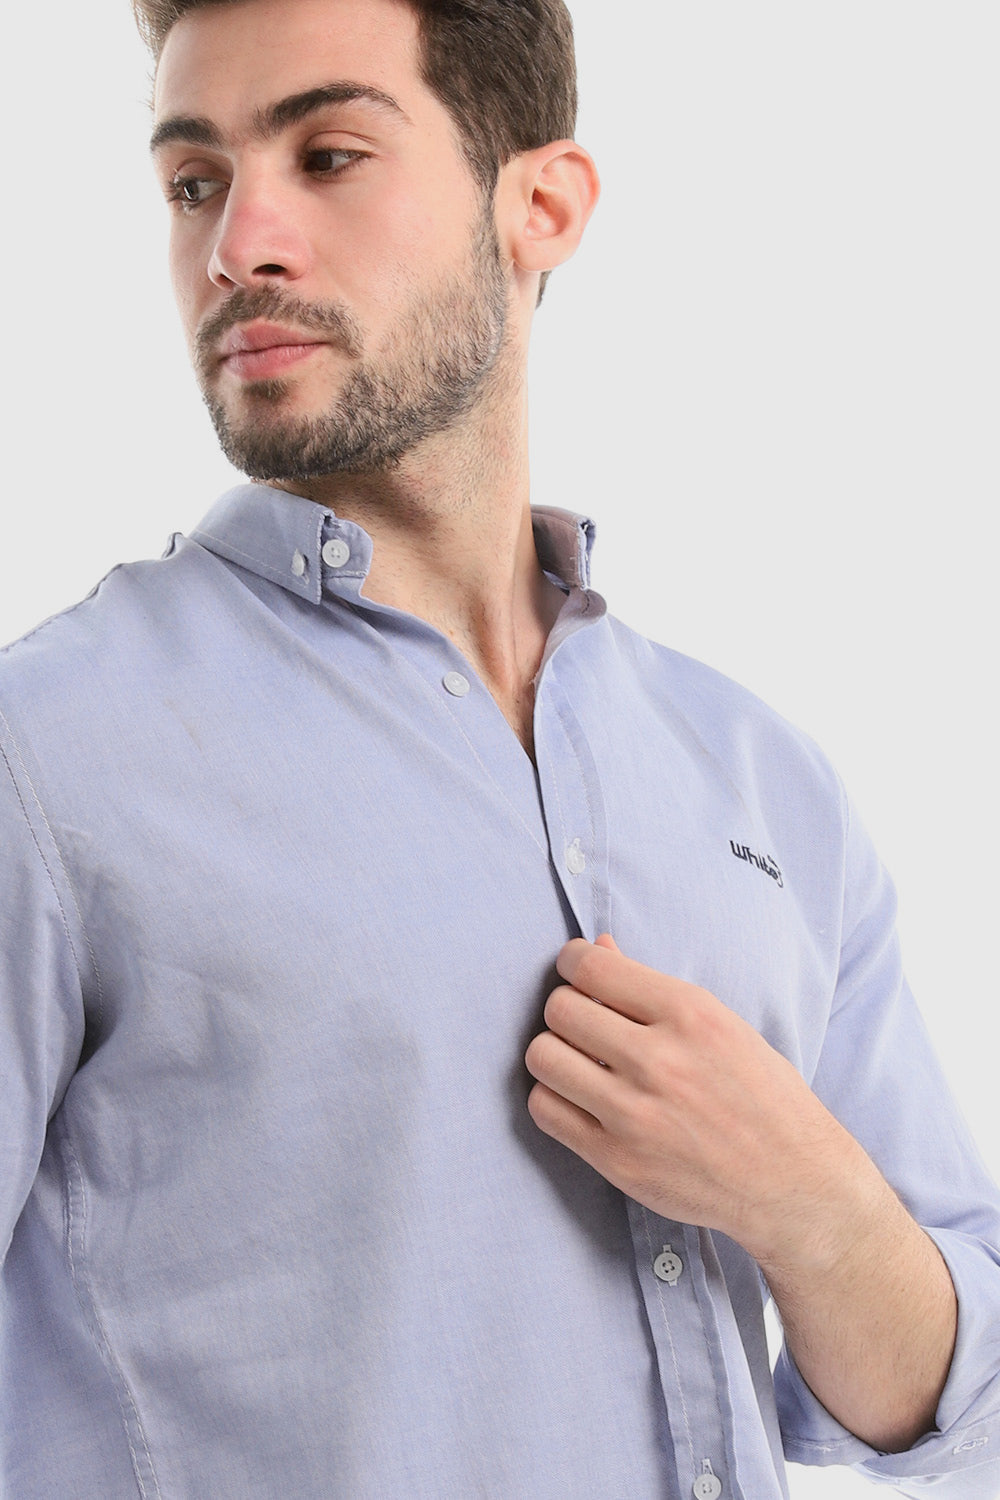 Accent Plain Buttoned Down Long Sleeves Shirt